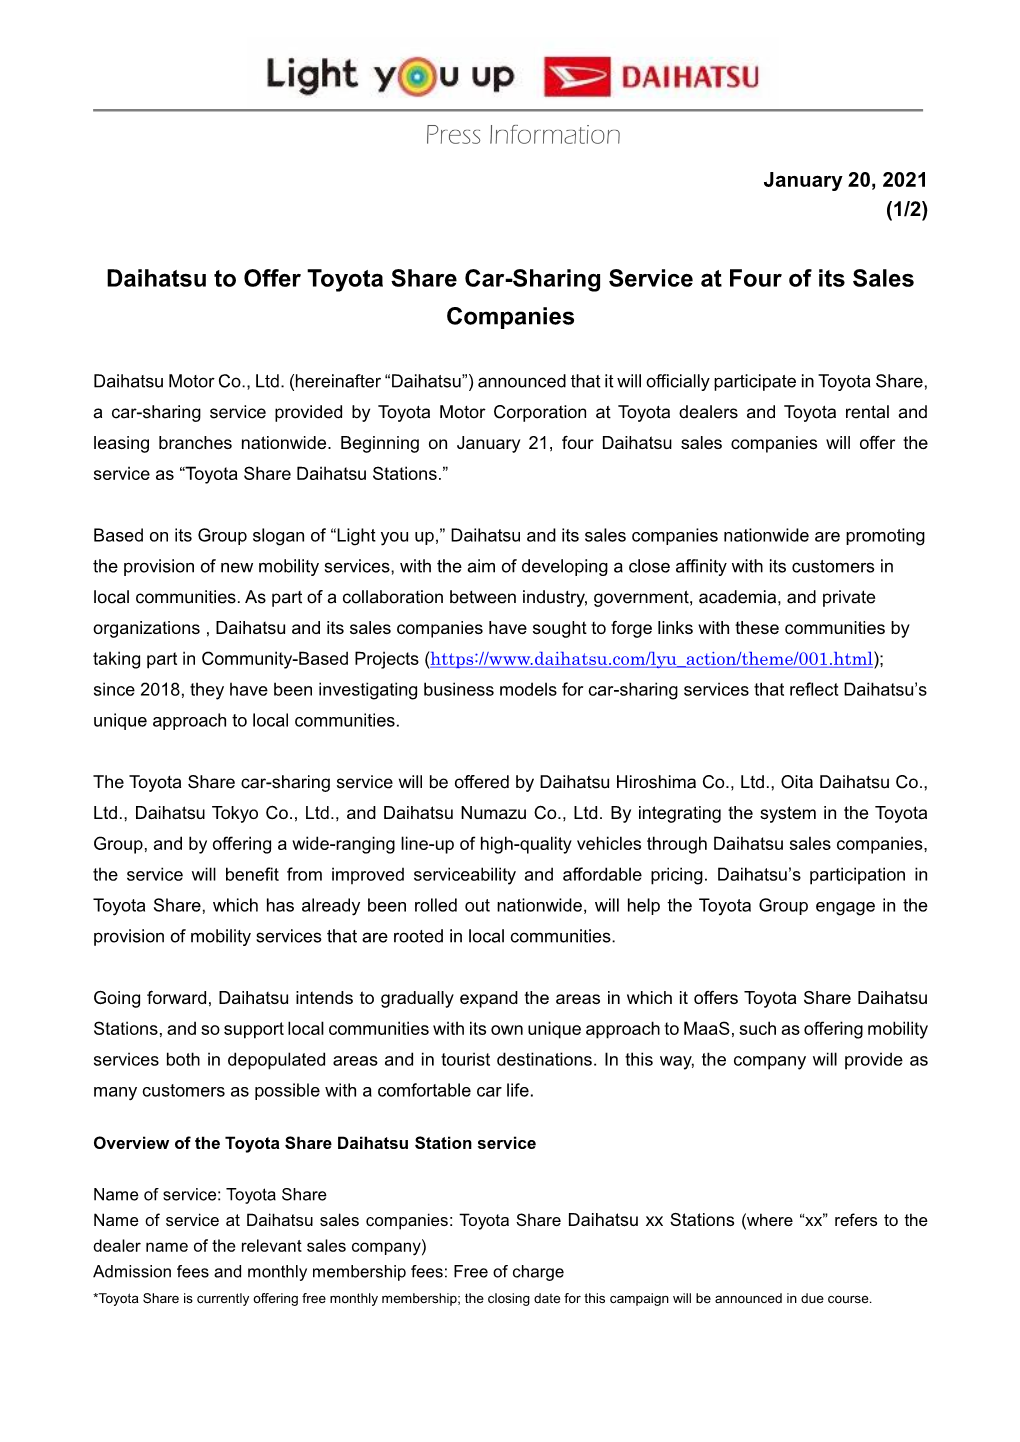 Daihatsu to Offer Toyota Share Car-Sharing Service at Four of Its Sales Companies